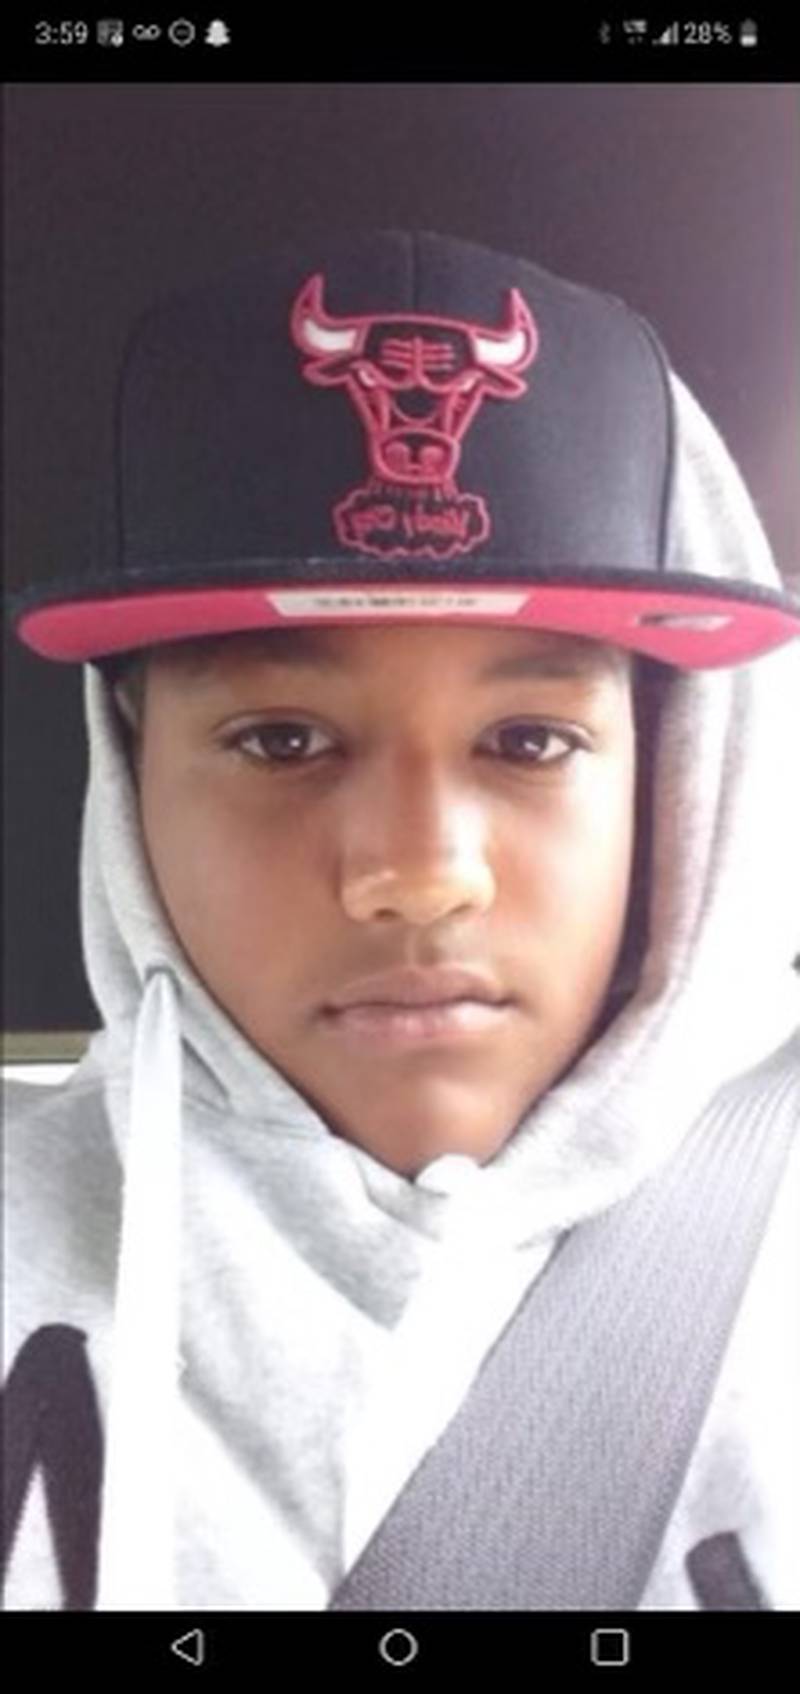 A 14-year-old Hastings boy died Sunday after he was struck by a pickup truck in St. Johns County. The family has identified the victim as 14-year-old Xaiver Santana.